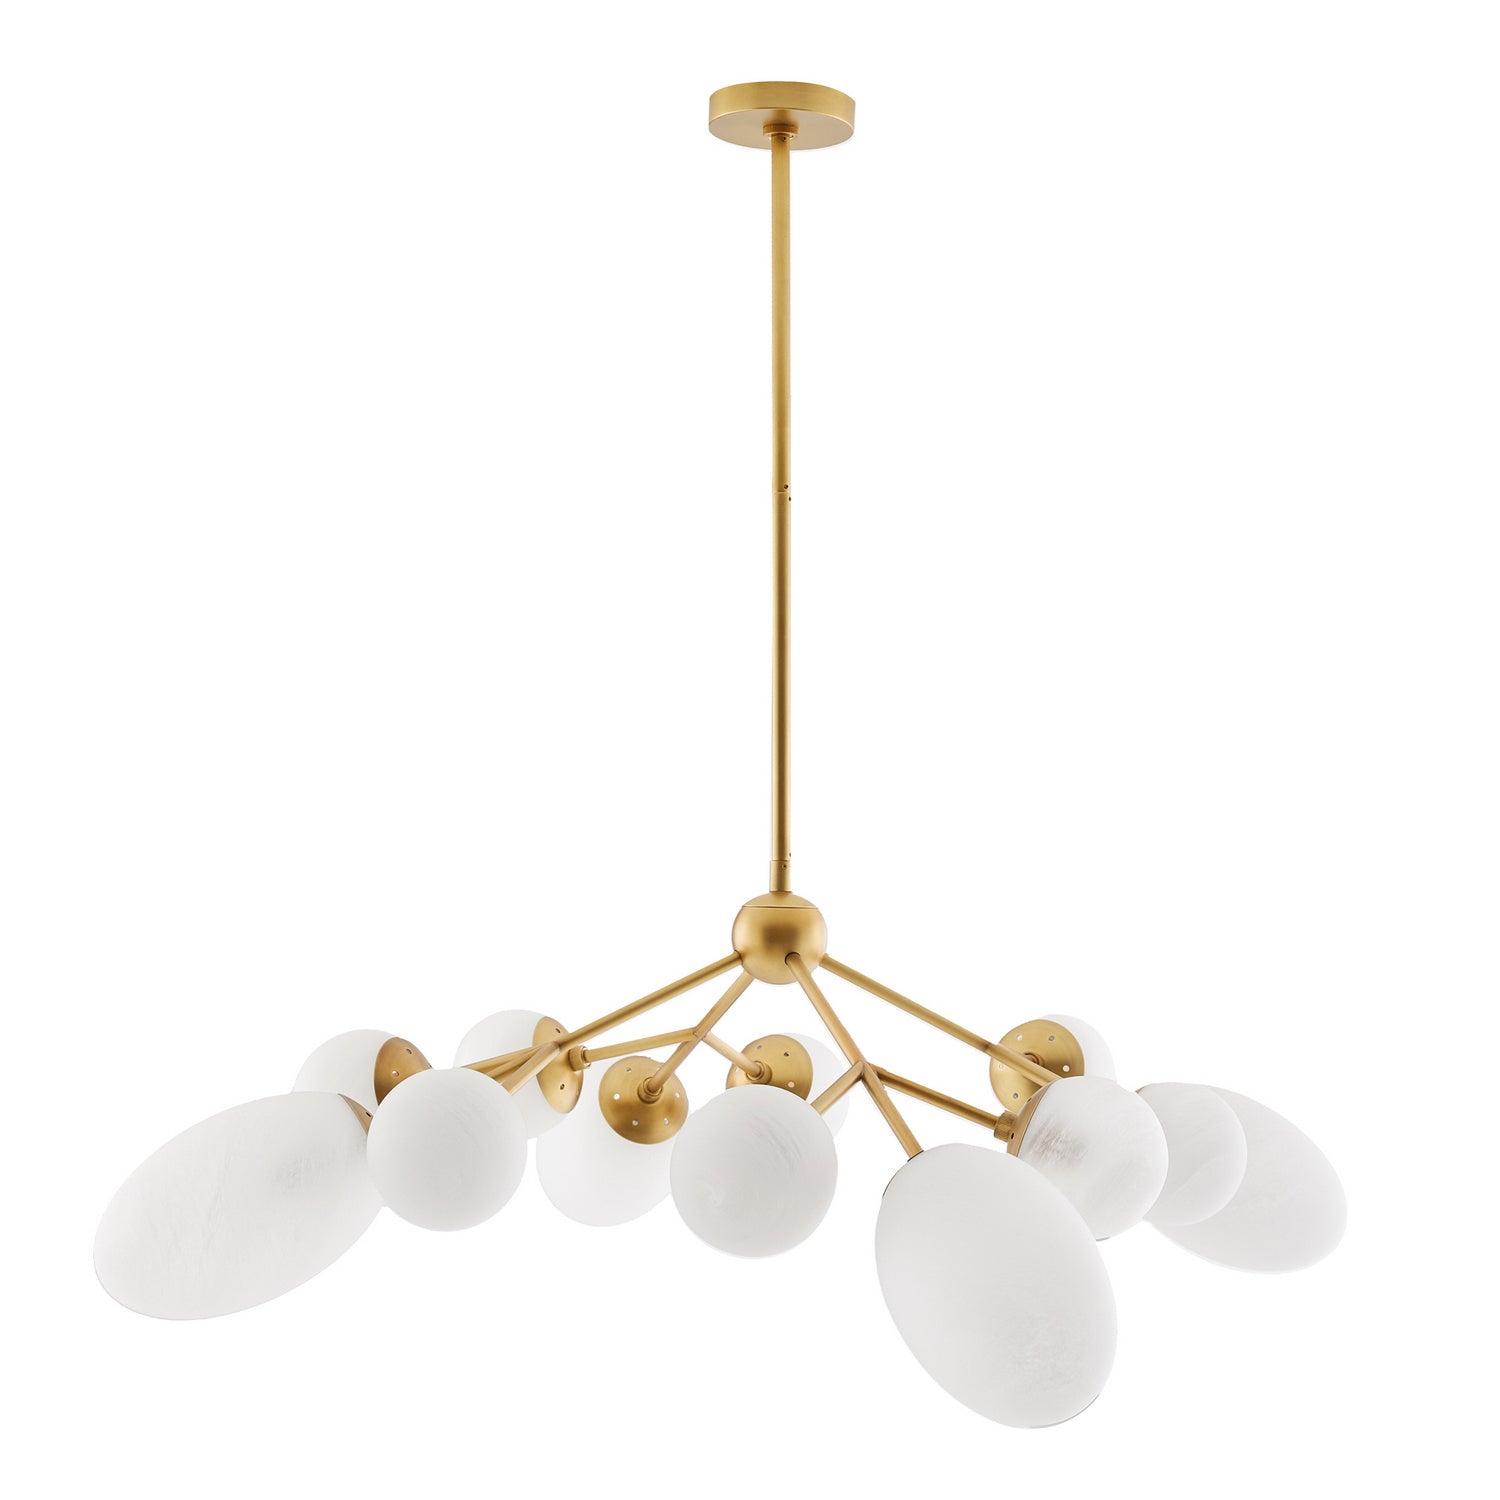 12 Light Chandelier from the Panella collection in Brushed Brass finish